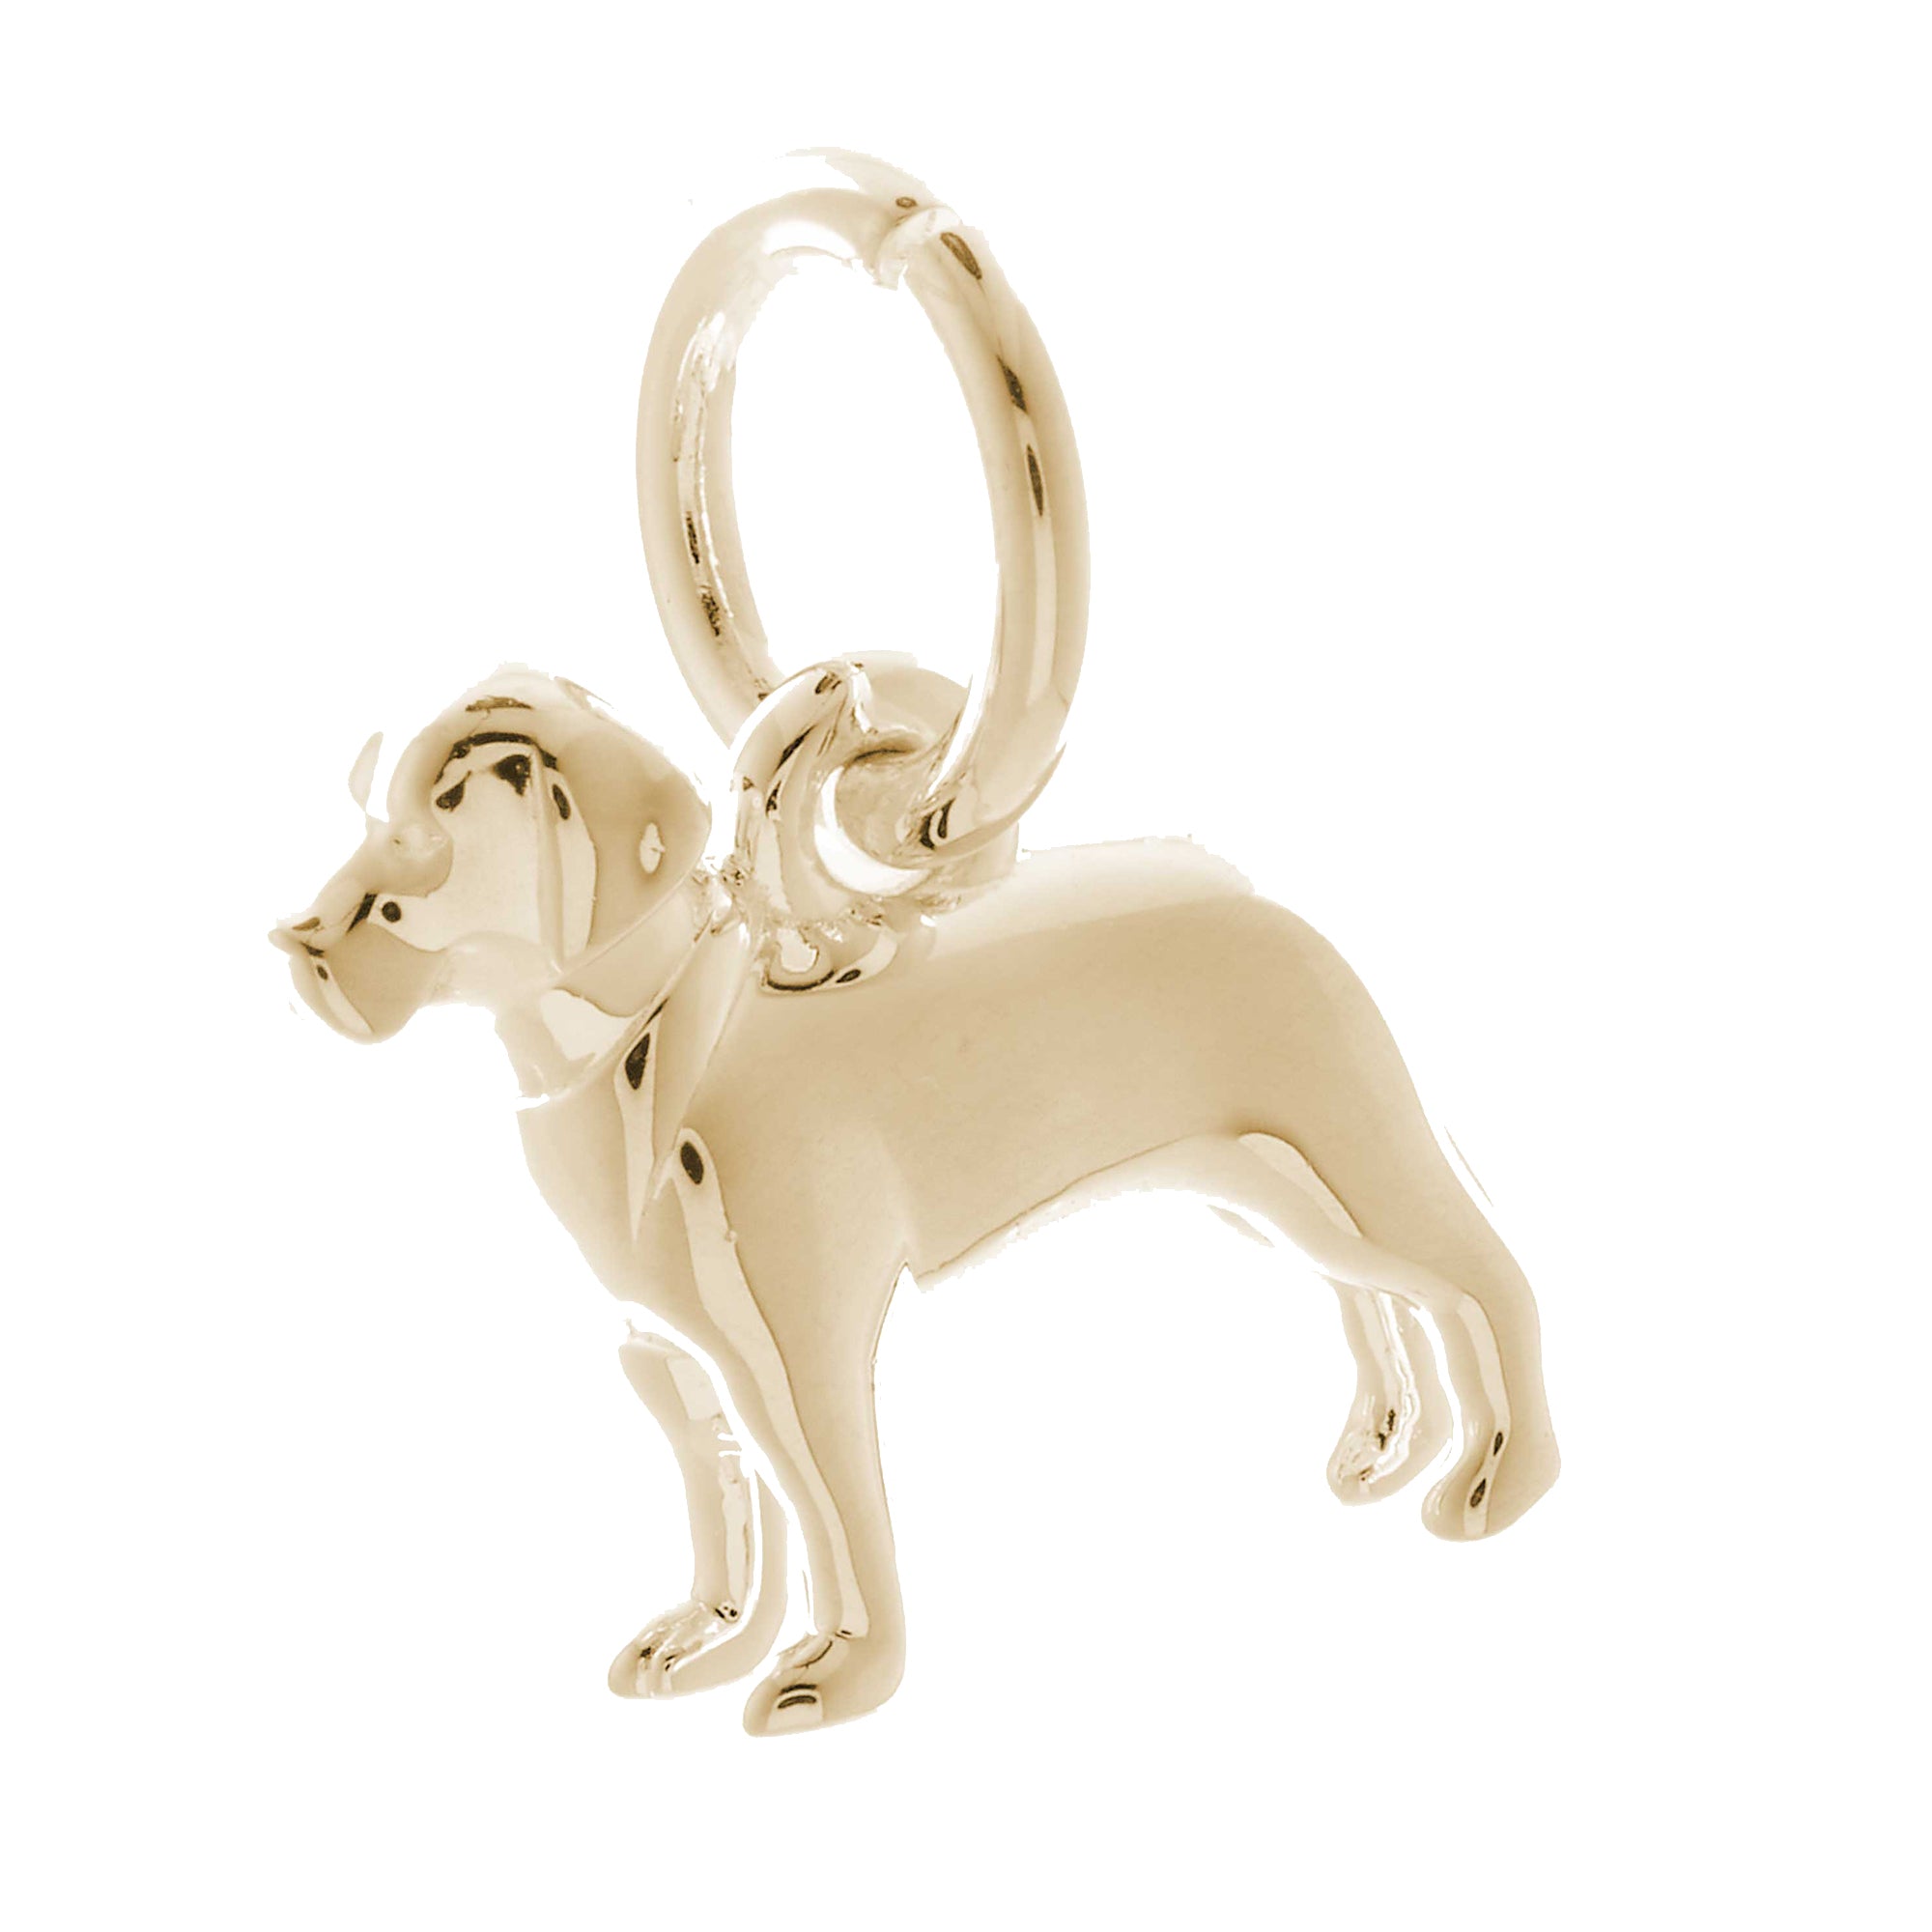 Solid 9ct gold drakes head Labrador charm with tiny bandana (optional), perfect for a charm bracelet or necklace.